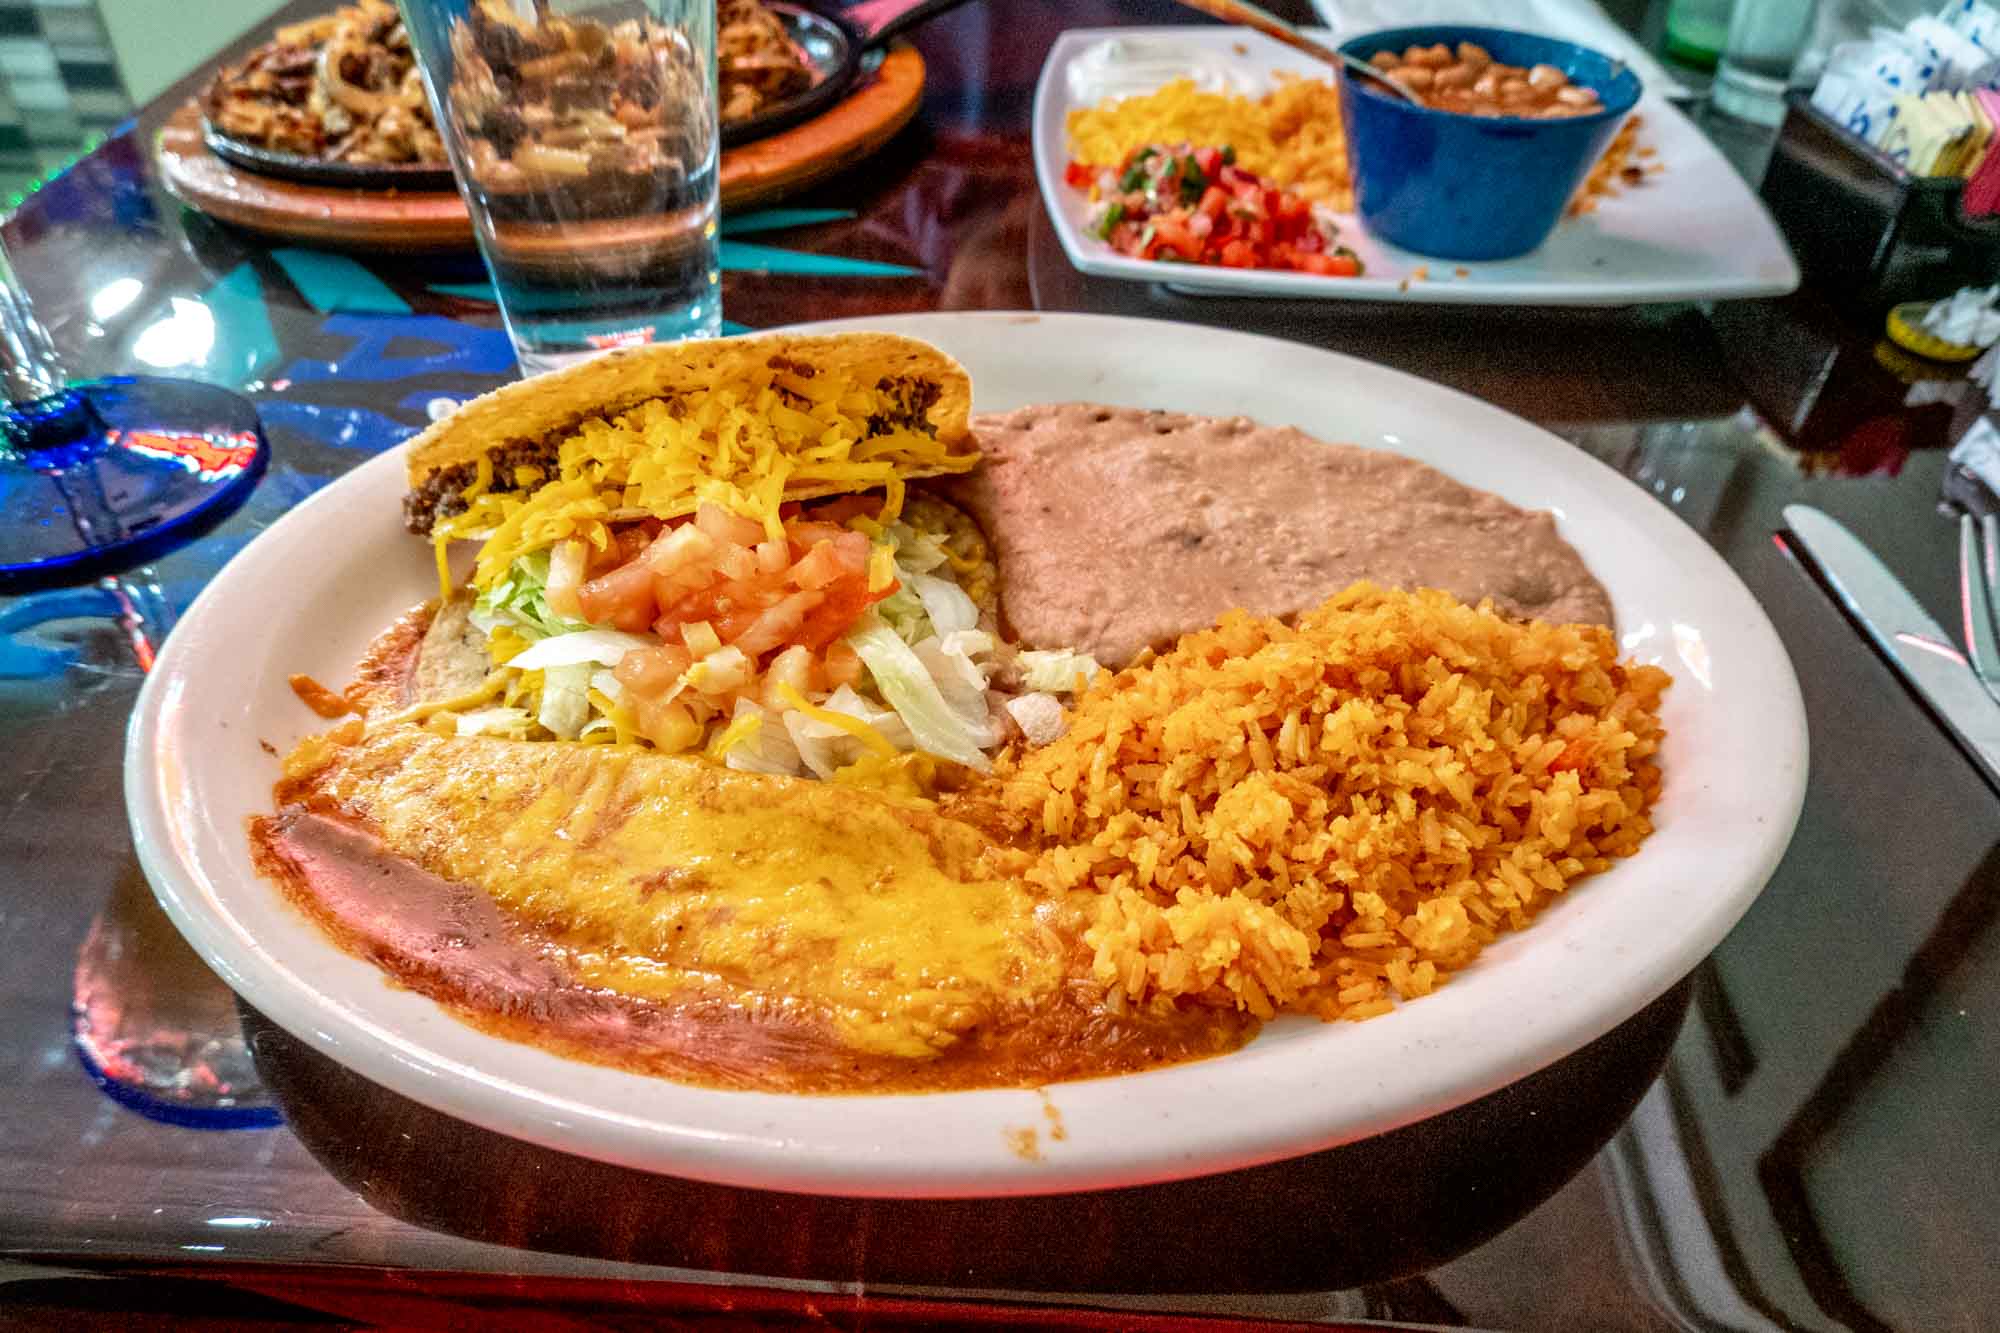 Tacos, enchiladas, and other Tex-Mex foods on a table in a Mexican restaurant